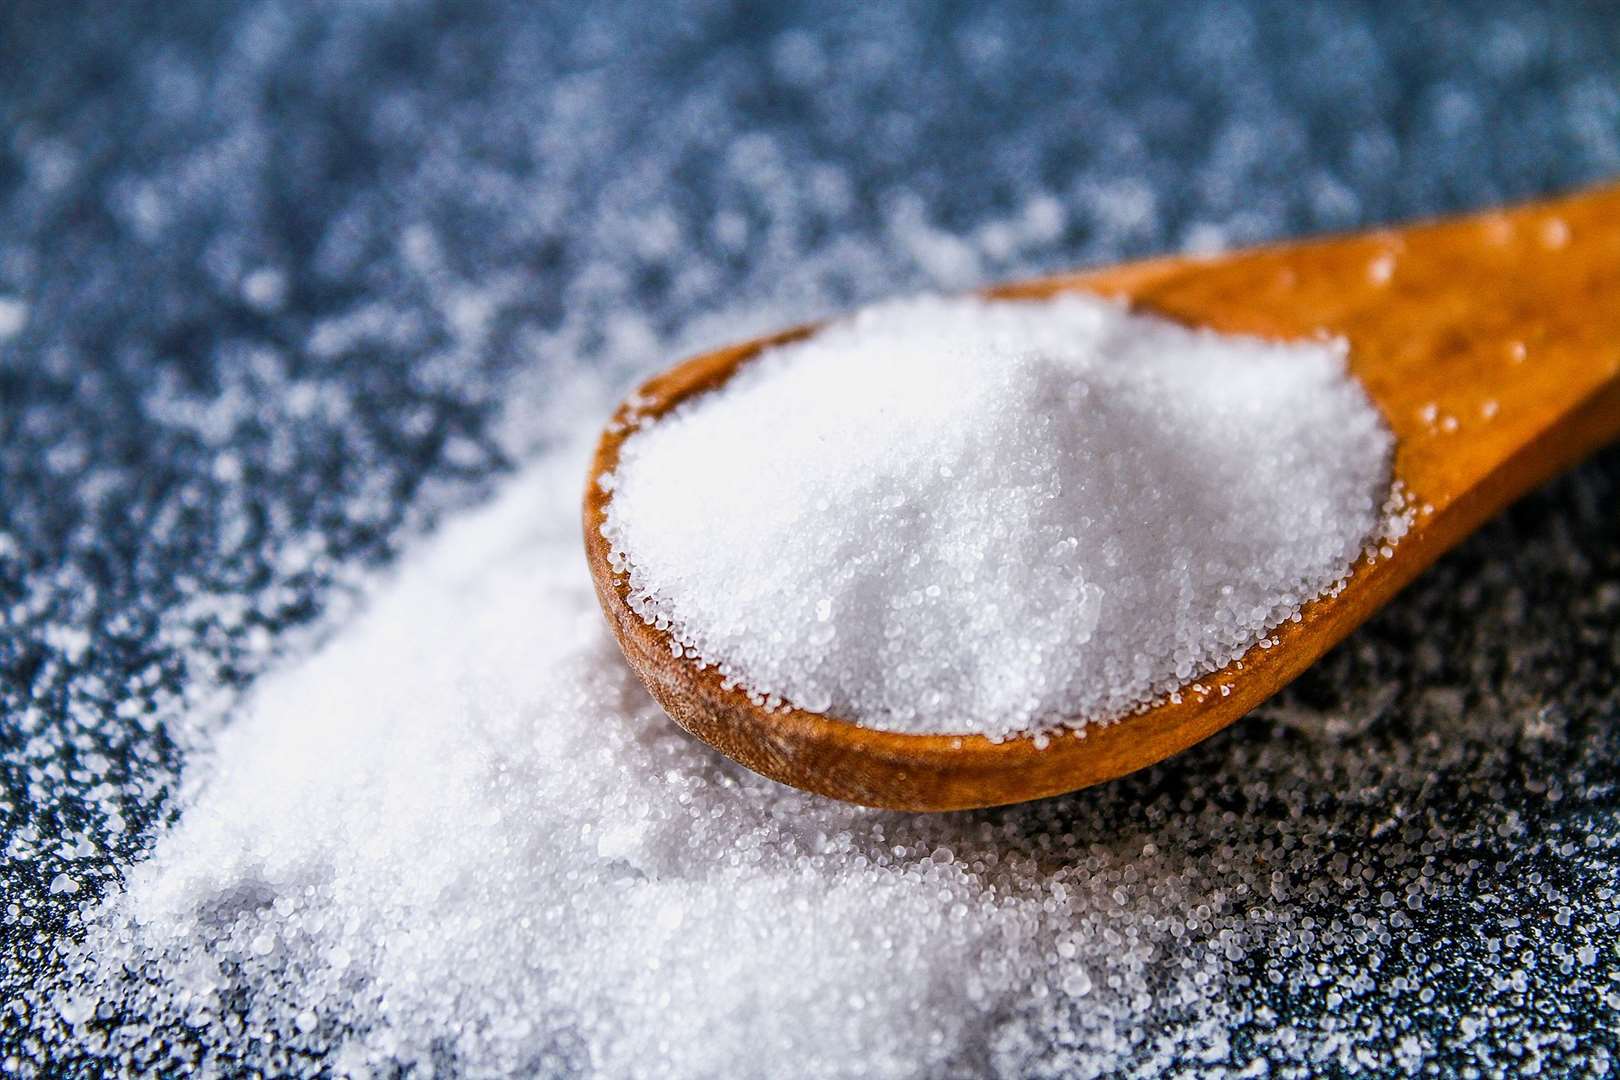 Children, it says, should consume no more than 3g of salt each day. Image: iStock/detry26.